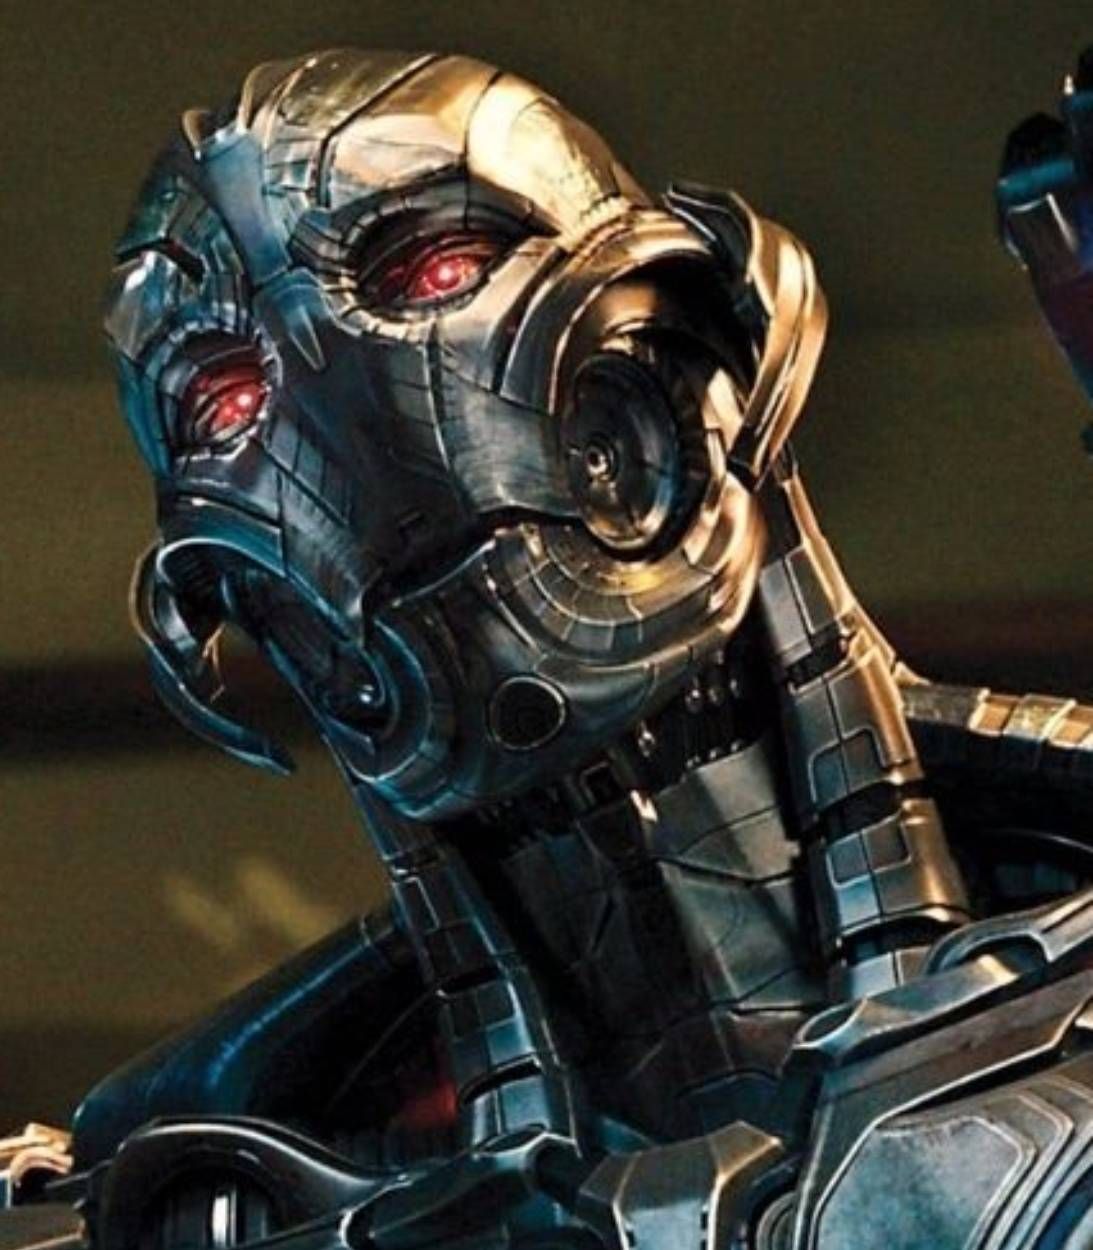 Ultron in Avengers Age of Ultron pic vertical